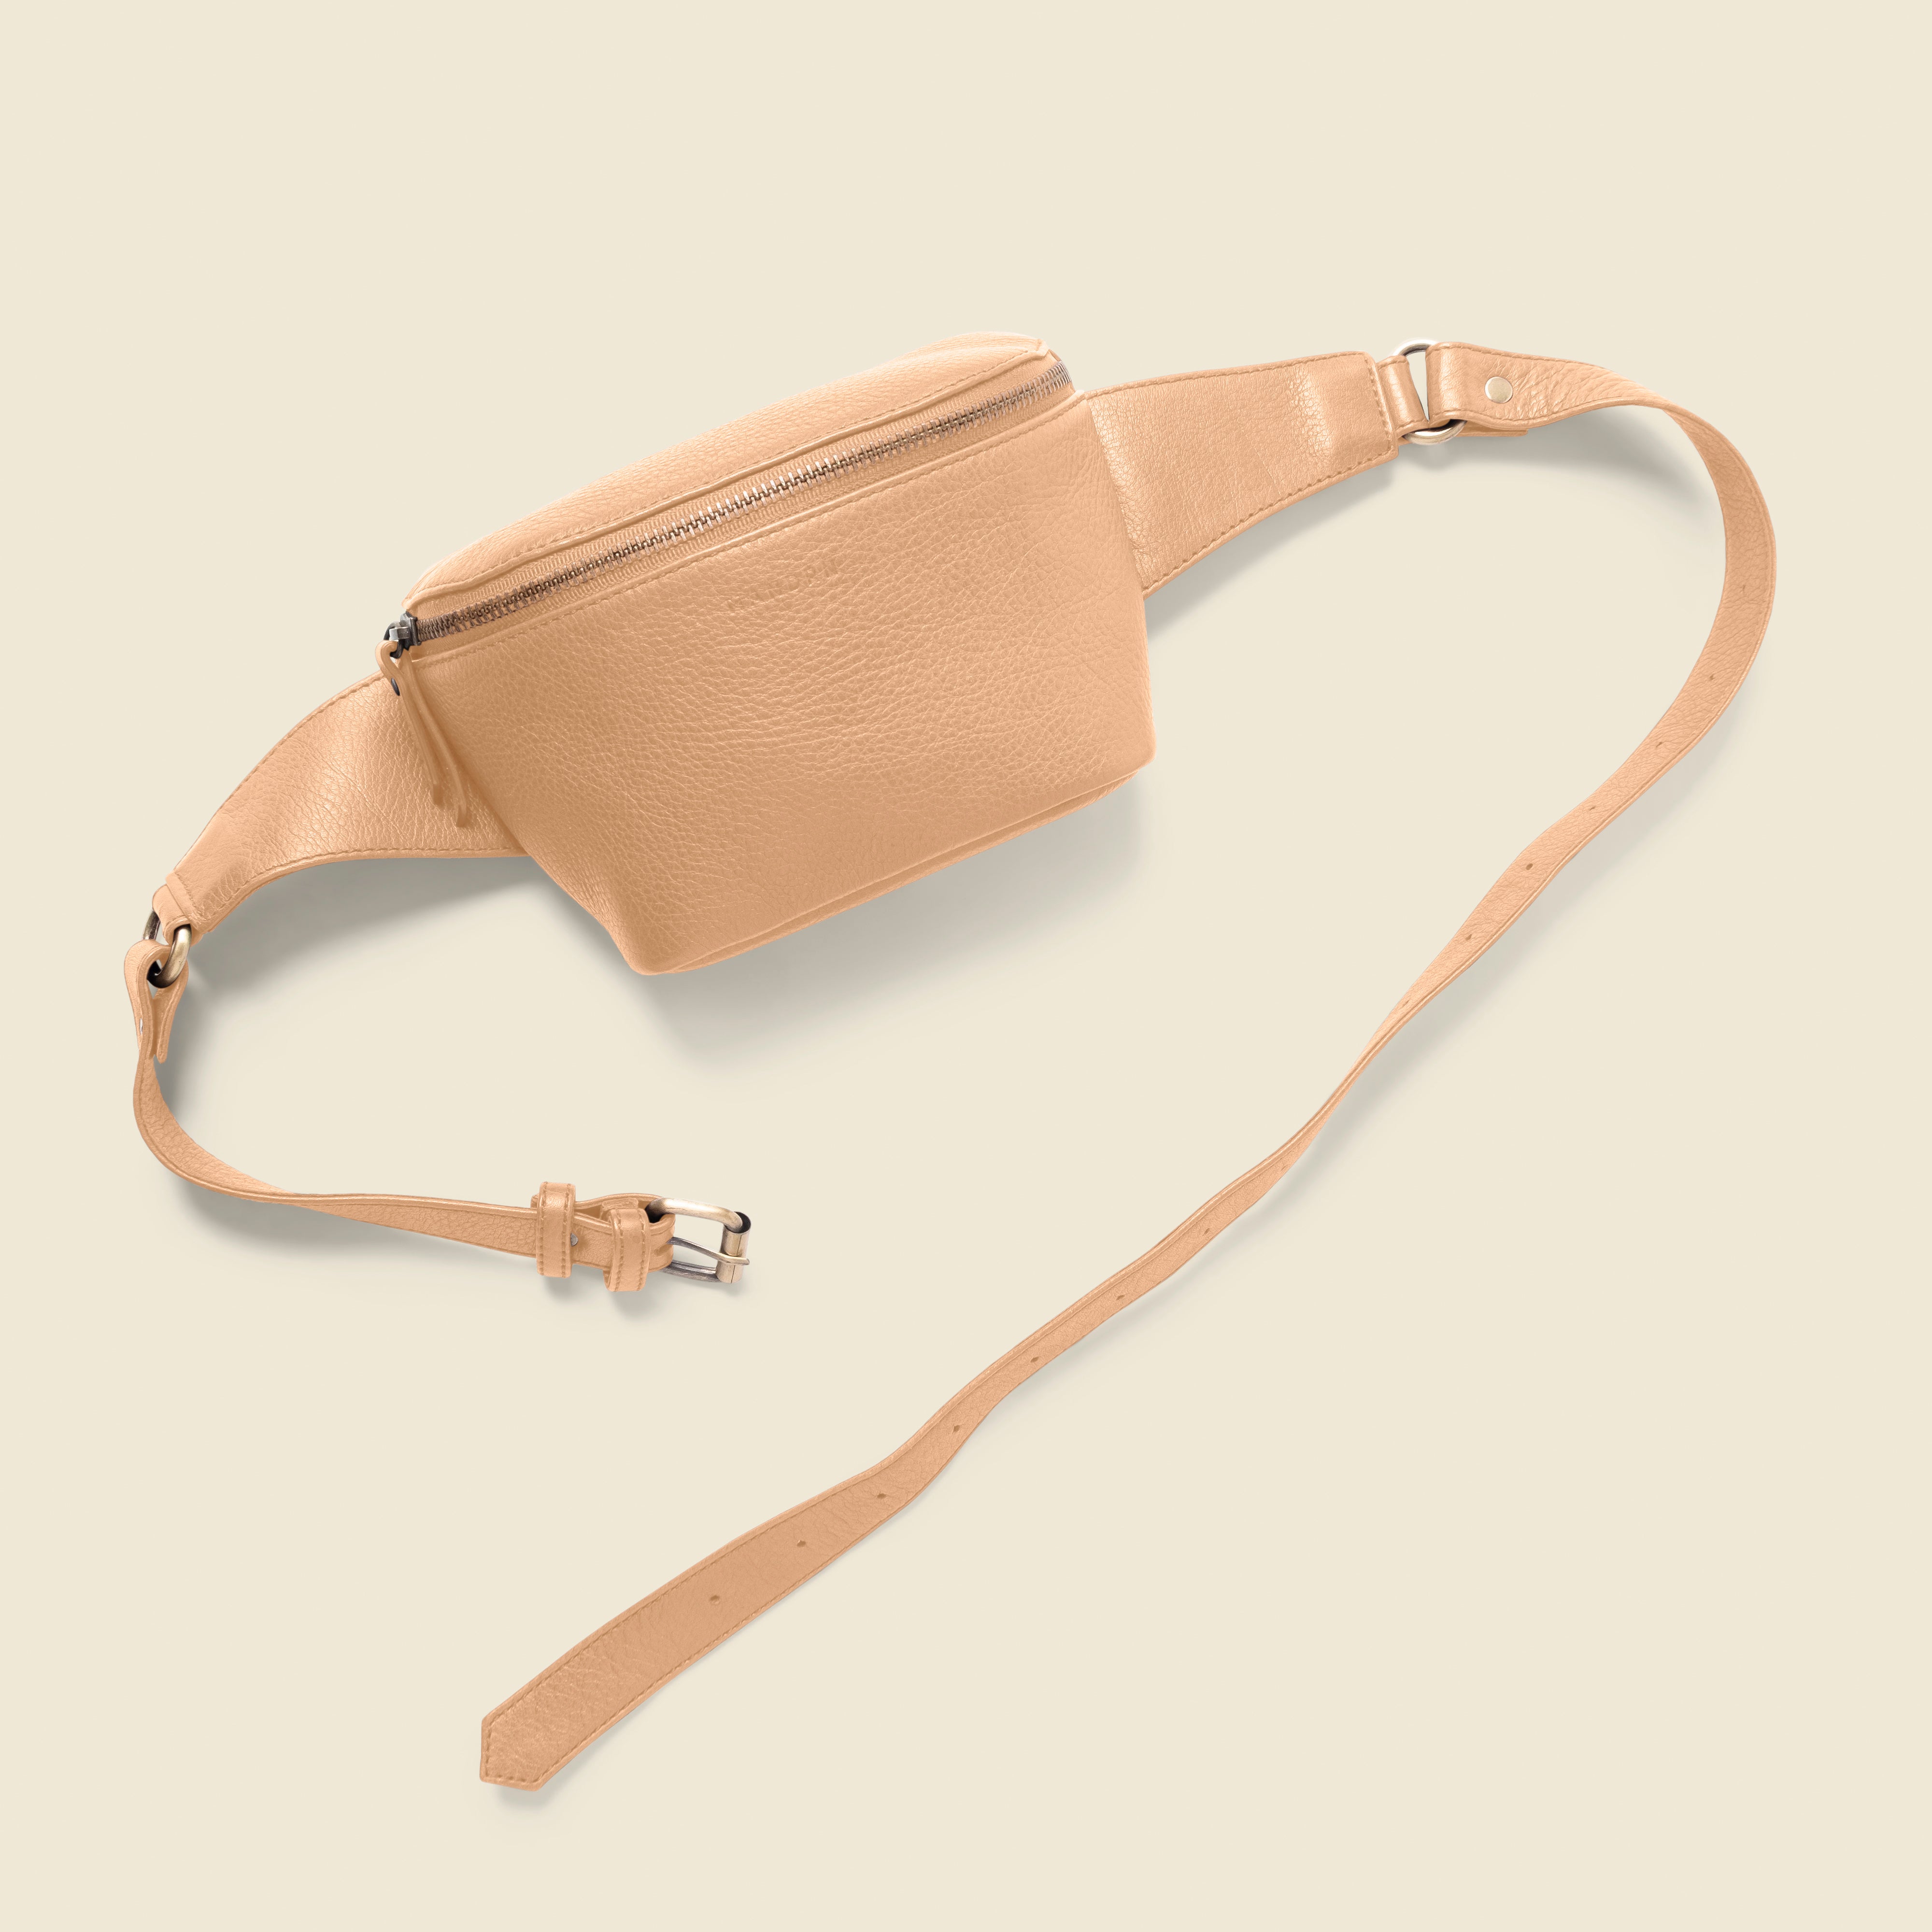 beige leather fanny pack bag for private events and corporate gifts.